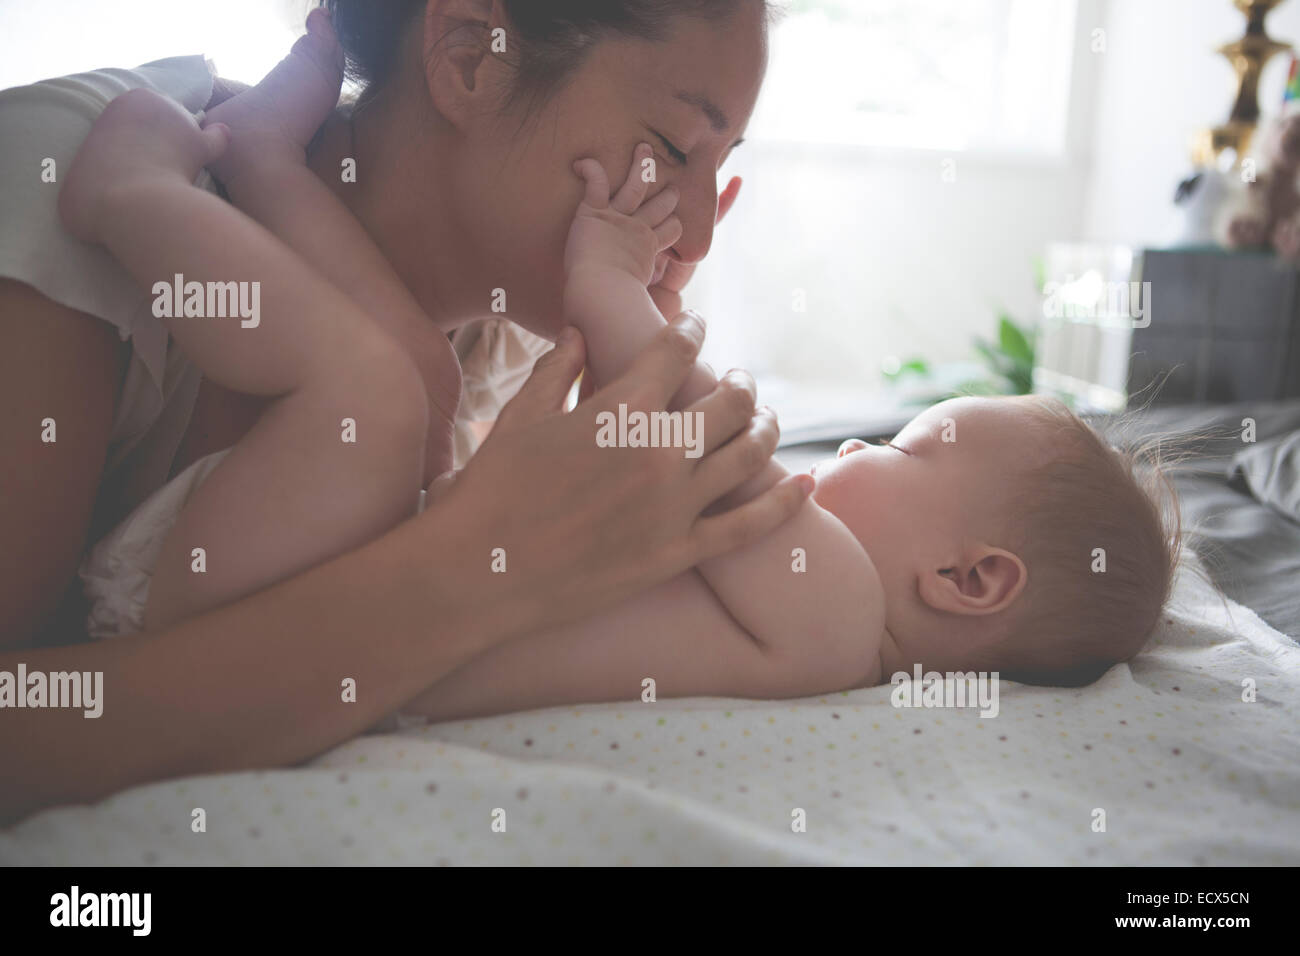 Mother playing with little baby, holding and kissing baby's hands Stock Photo